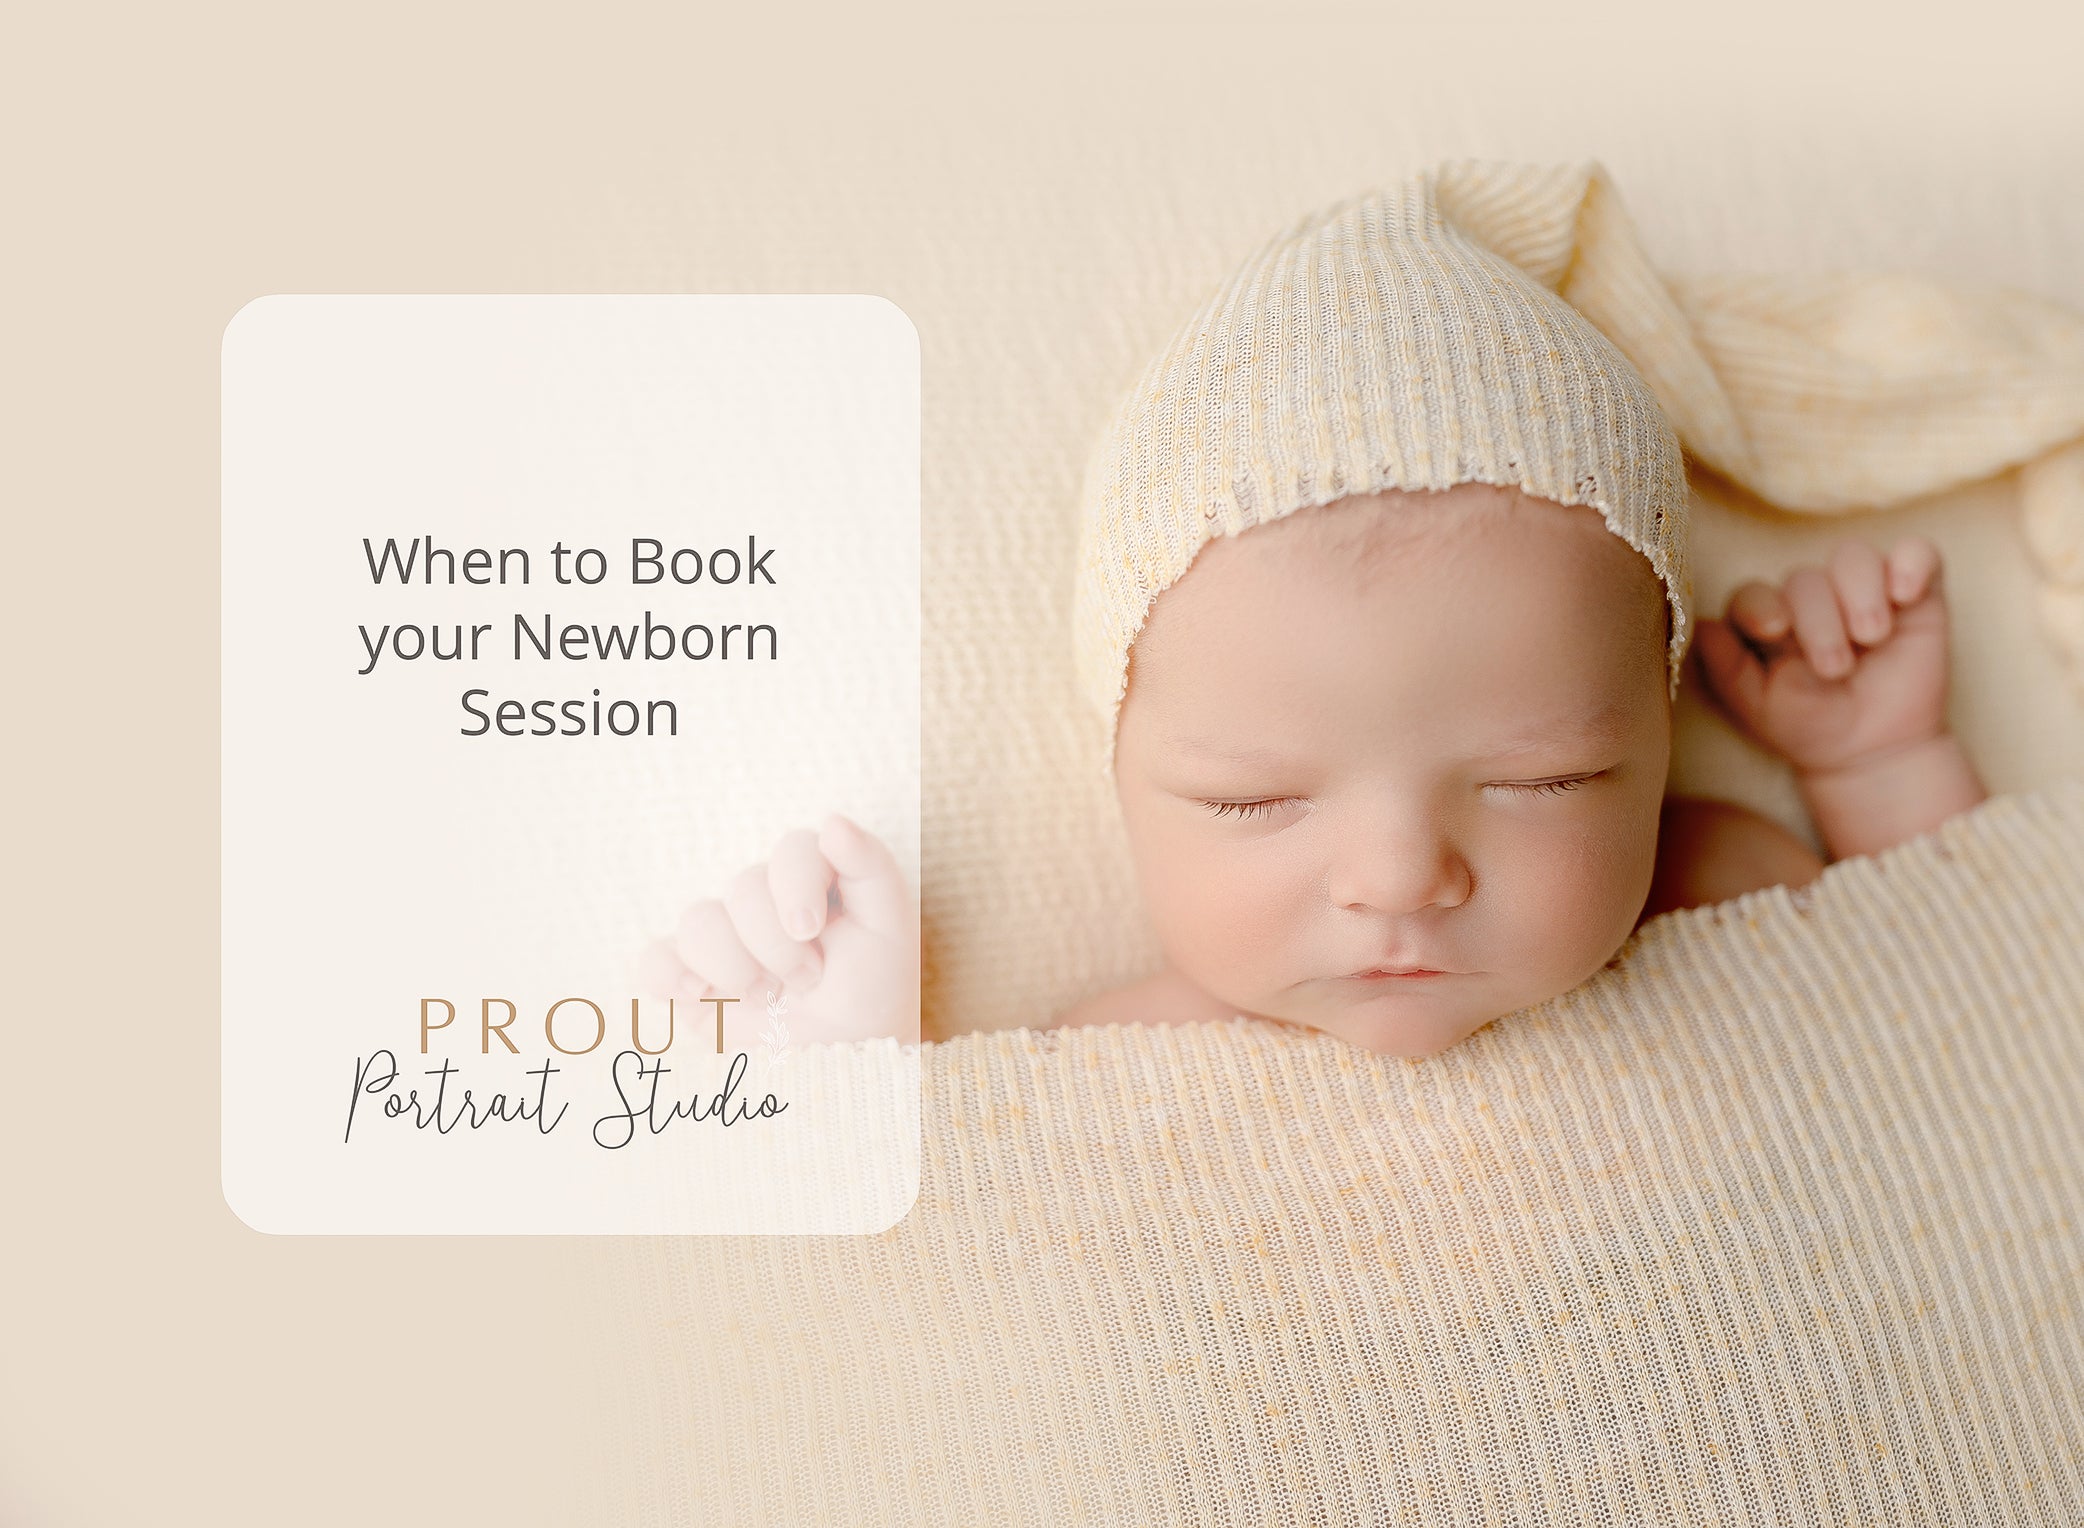 When to Book Your Newborn Session